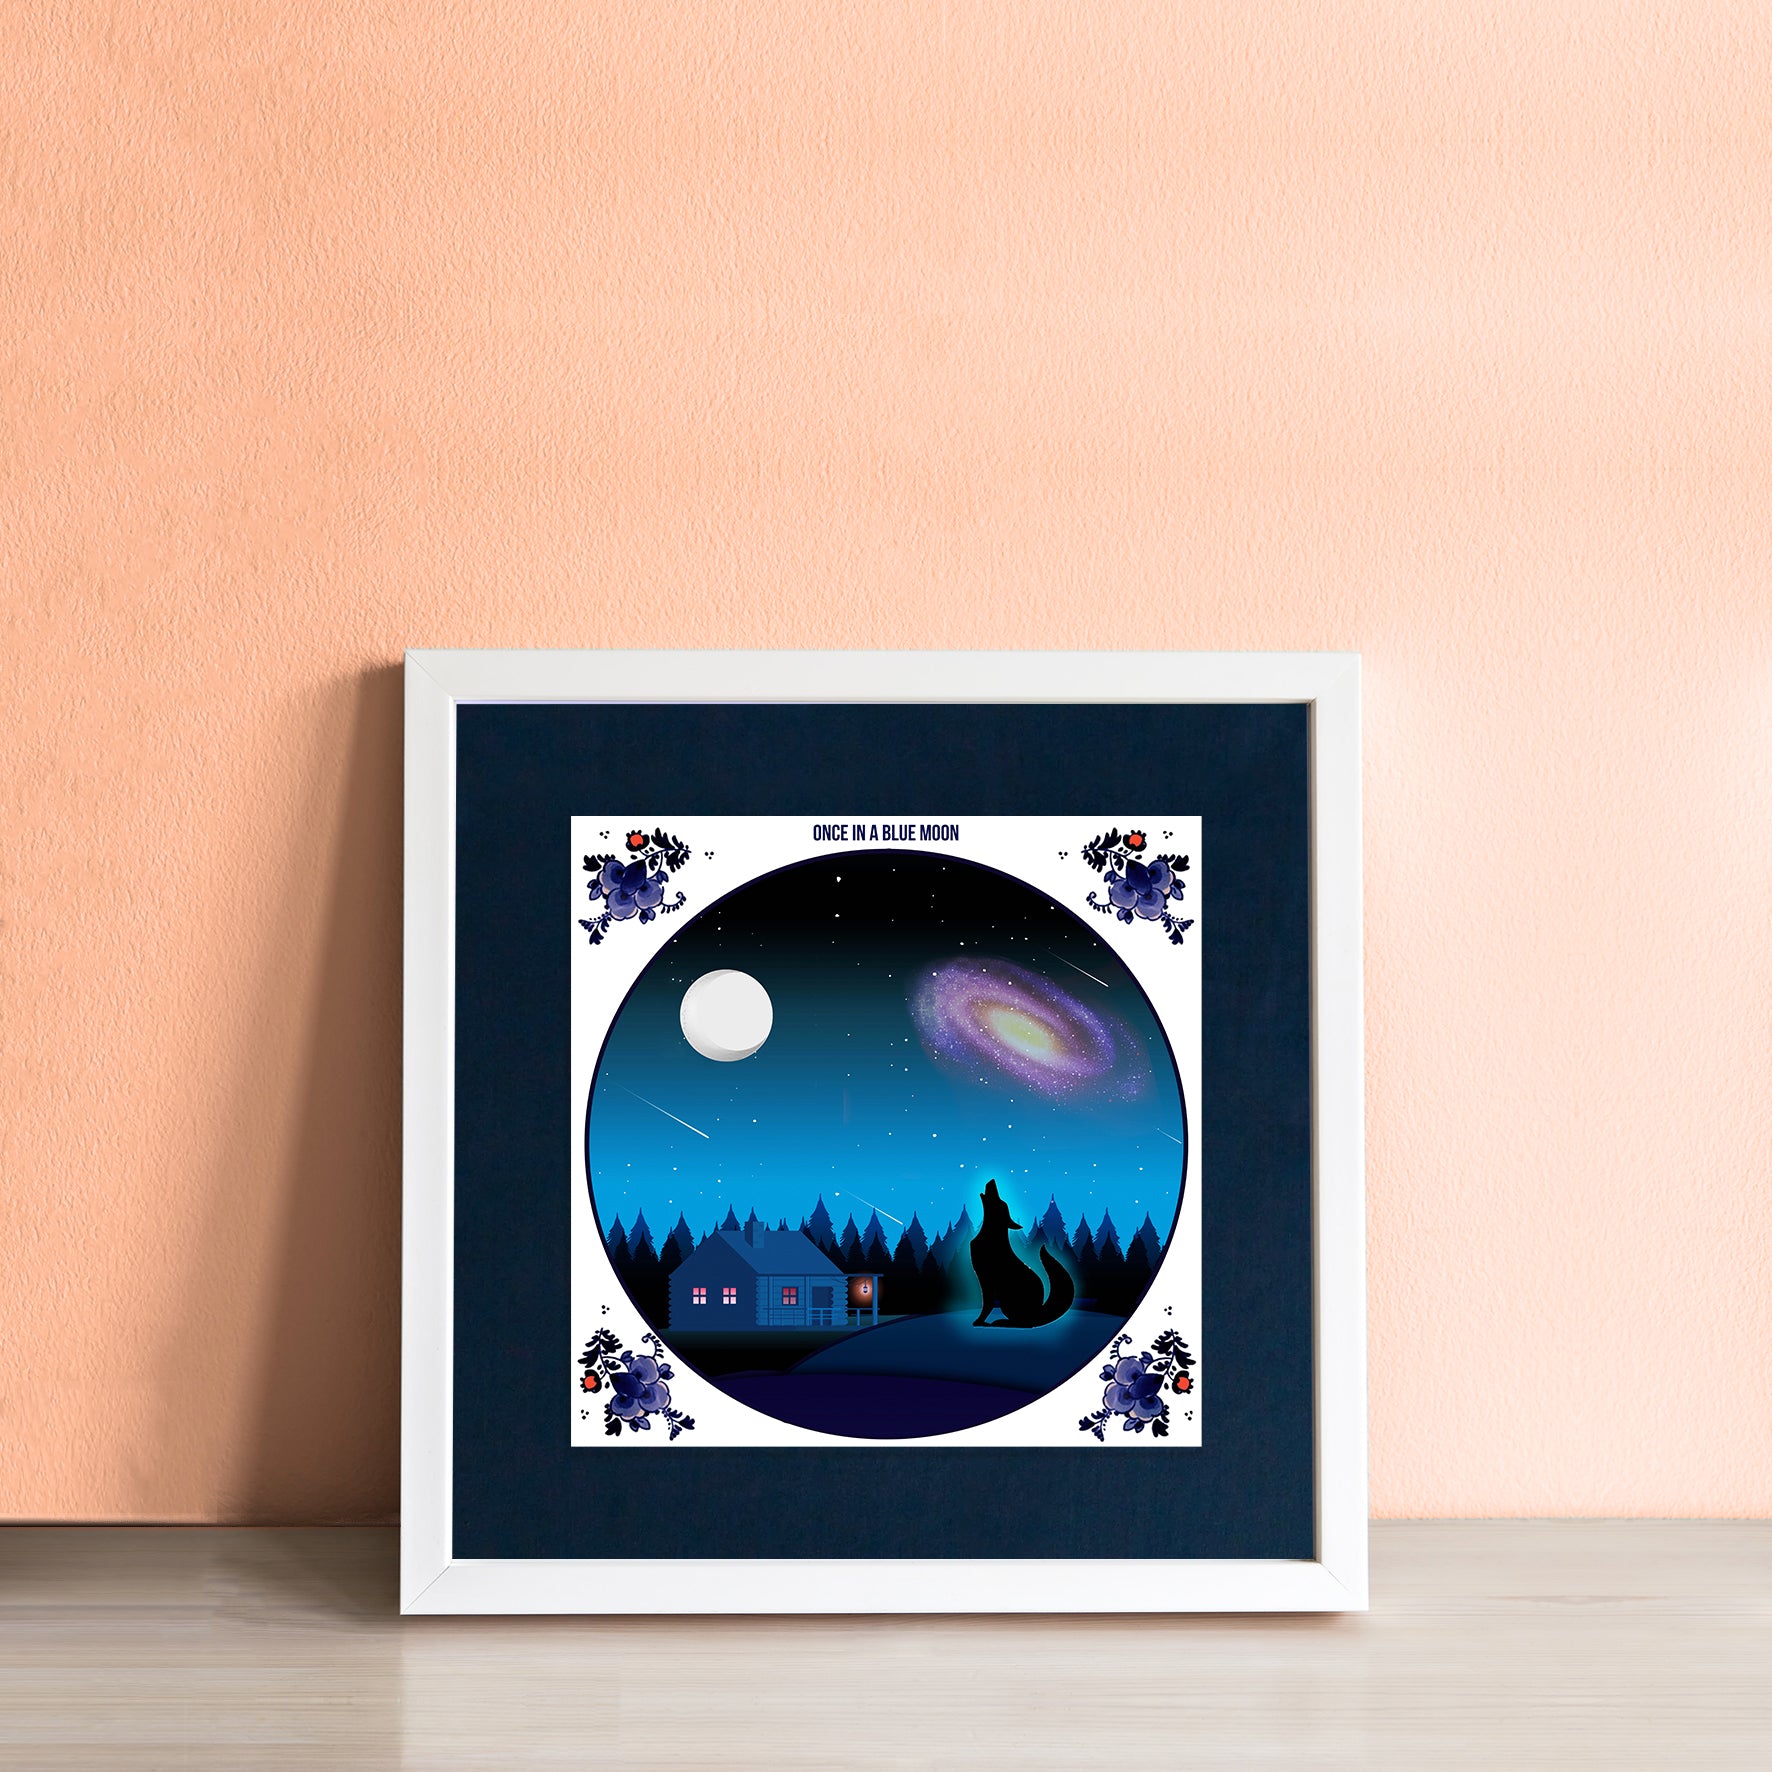 Once in a Blue Moon Art Tile